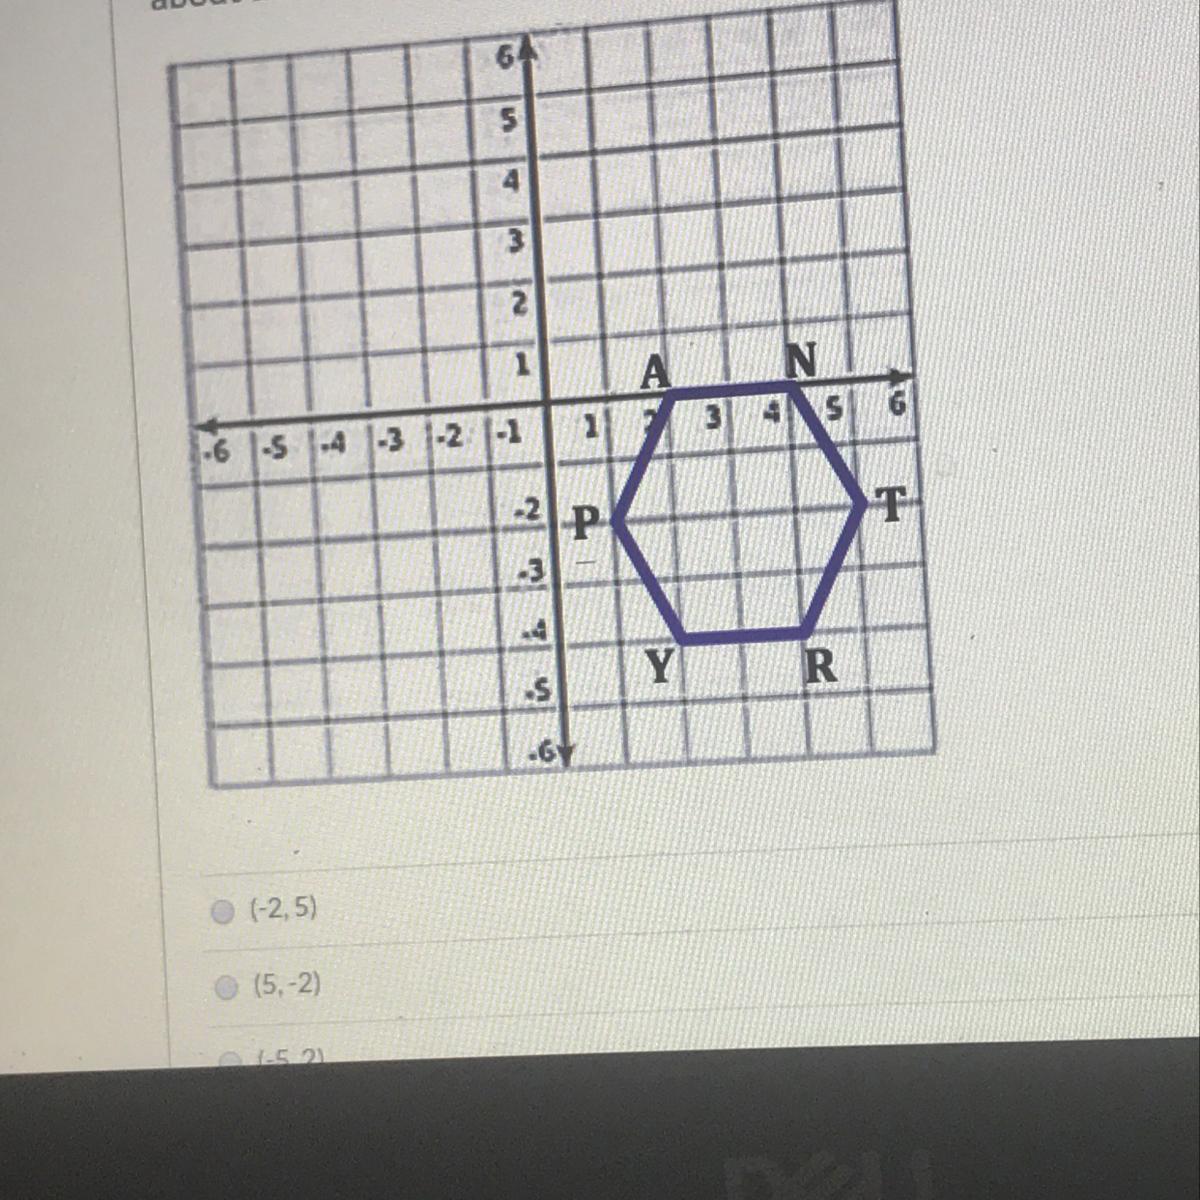 Which Is The Image Of Vertex T After The Hexagon Is Rotated 180 Degreesabout The Origin?